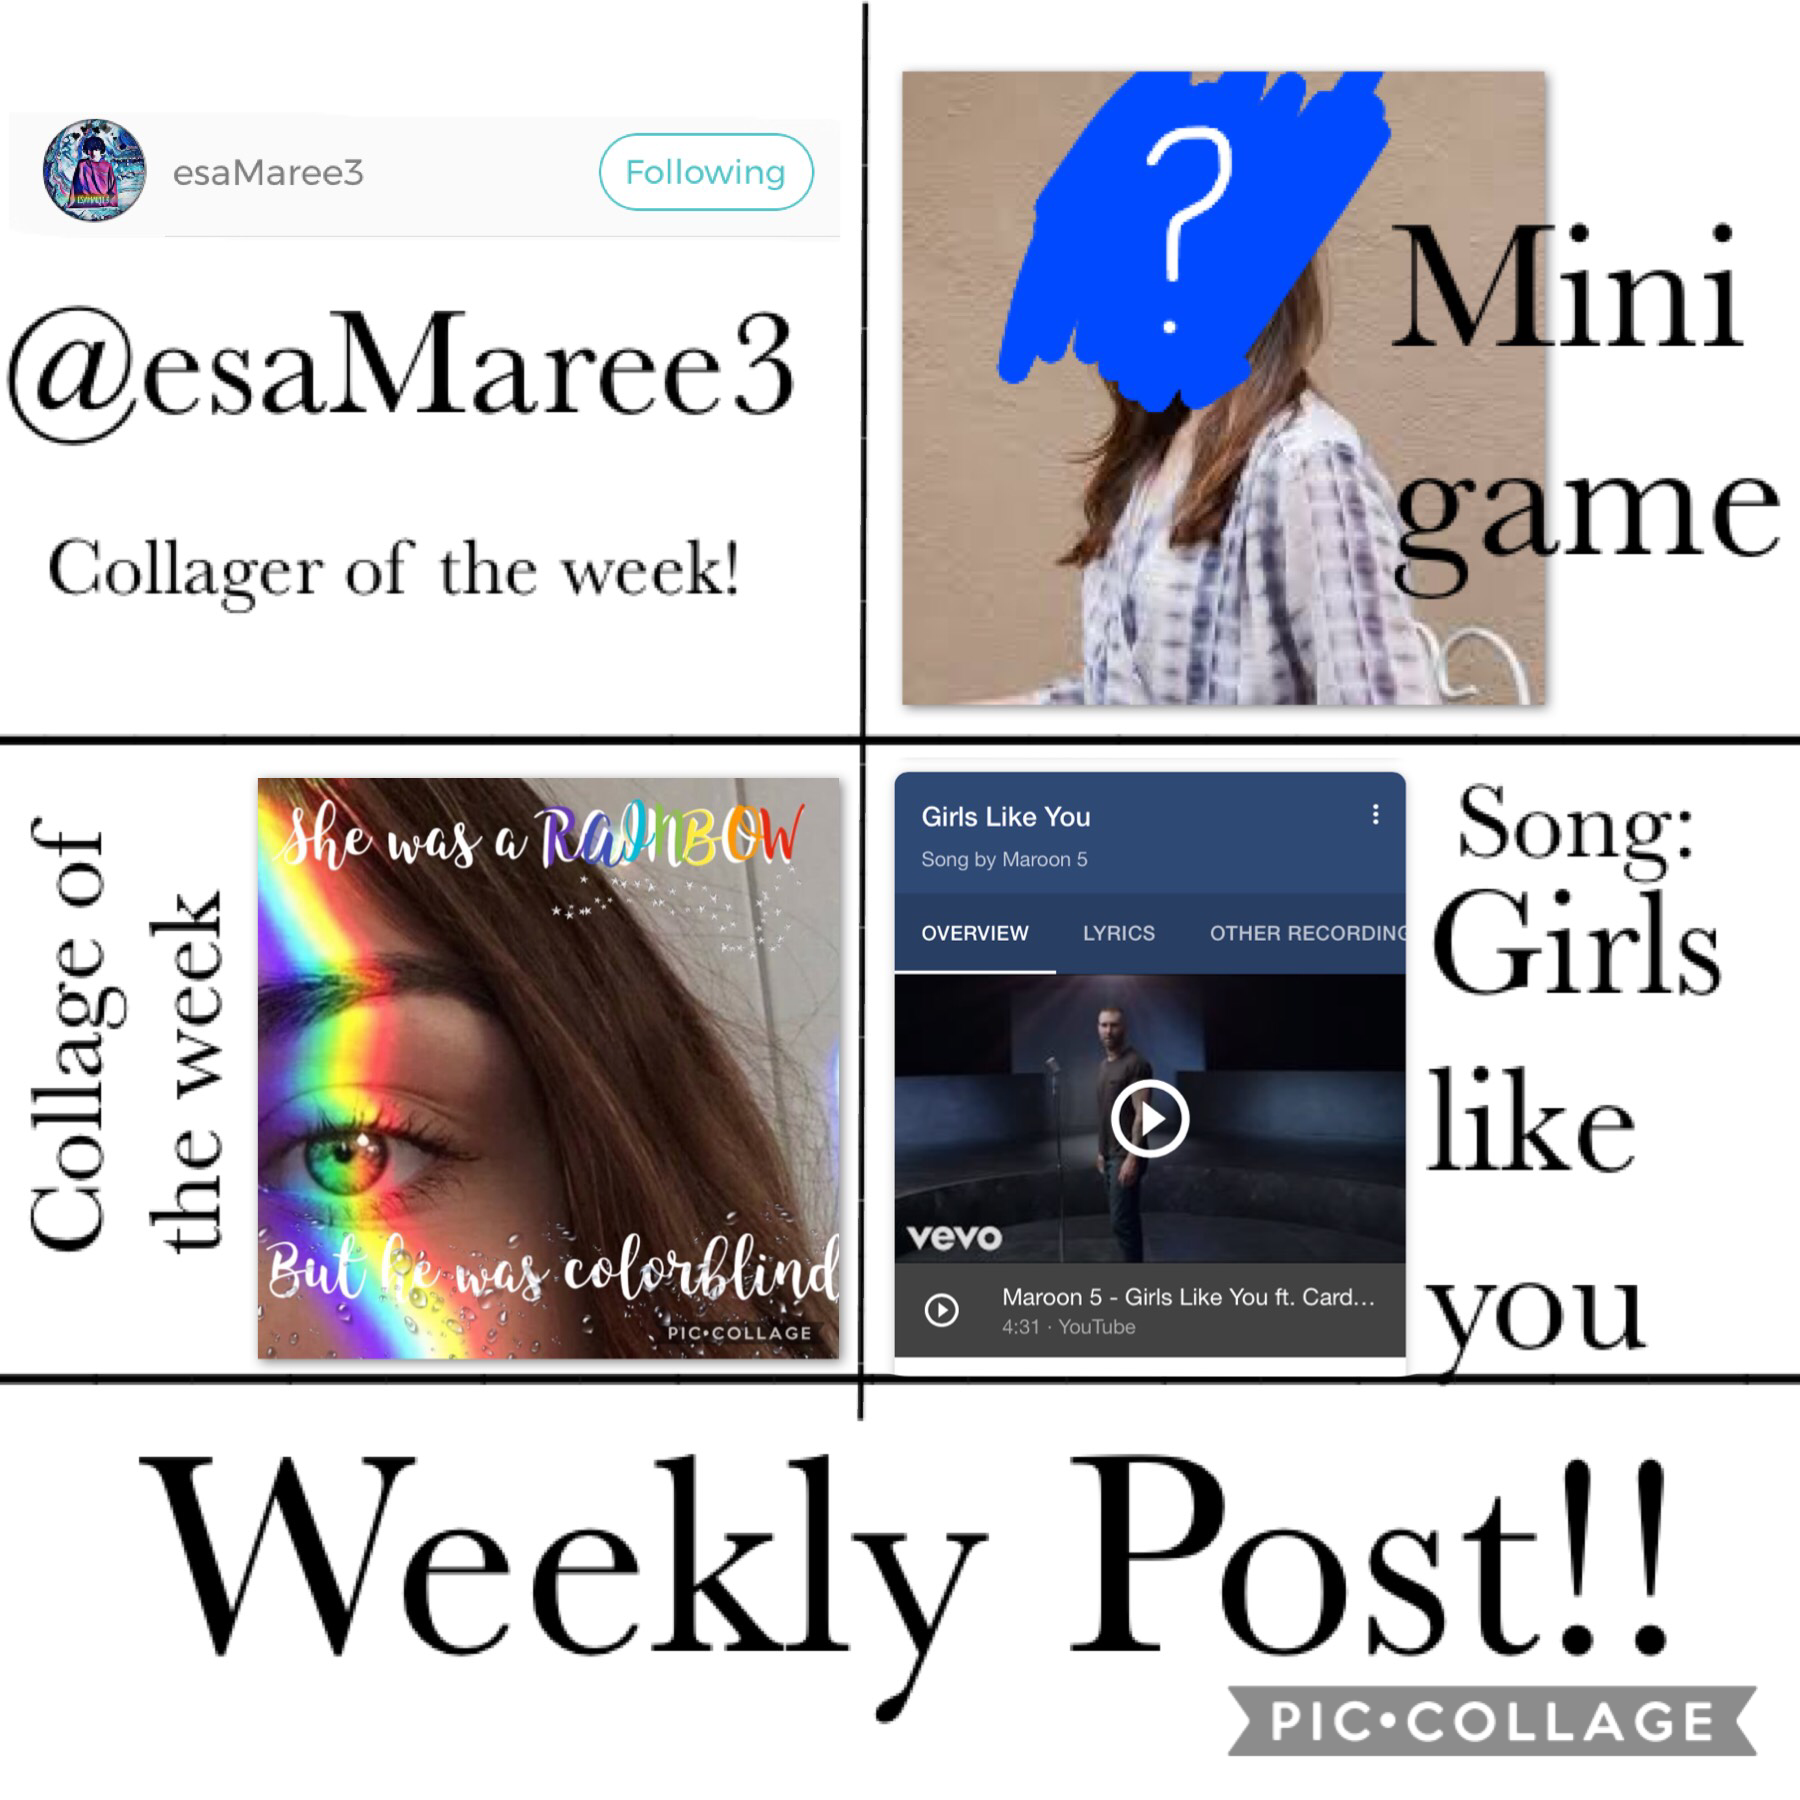 ☺️Tap📰



Idk if I’m gonna keep doing this lemme know what you think! The first to get the mystery person gets a shoutout!